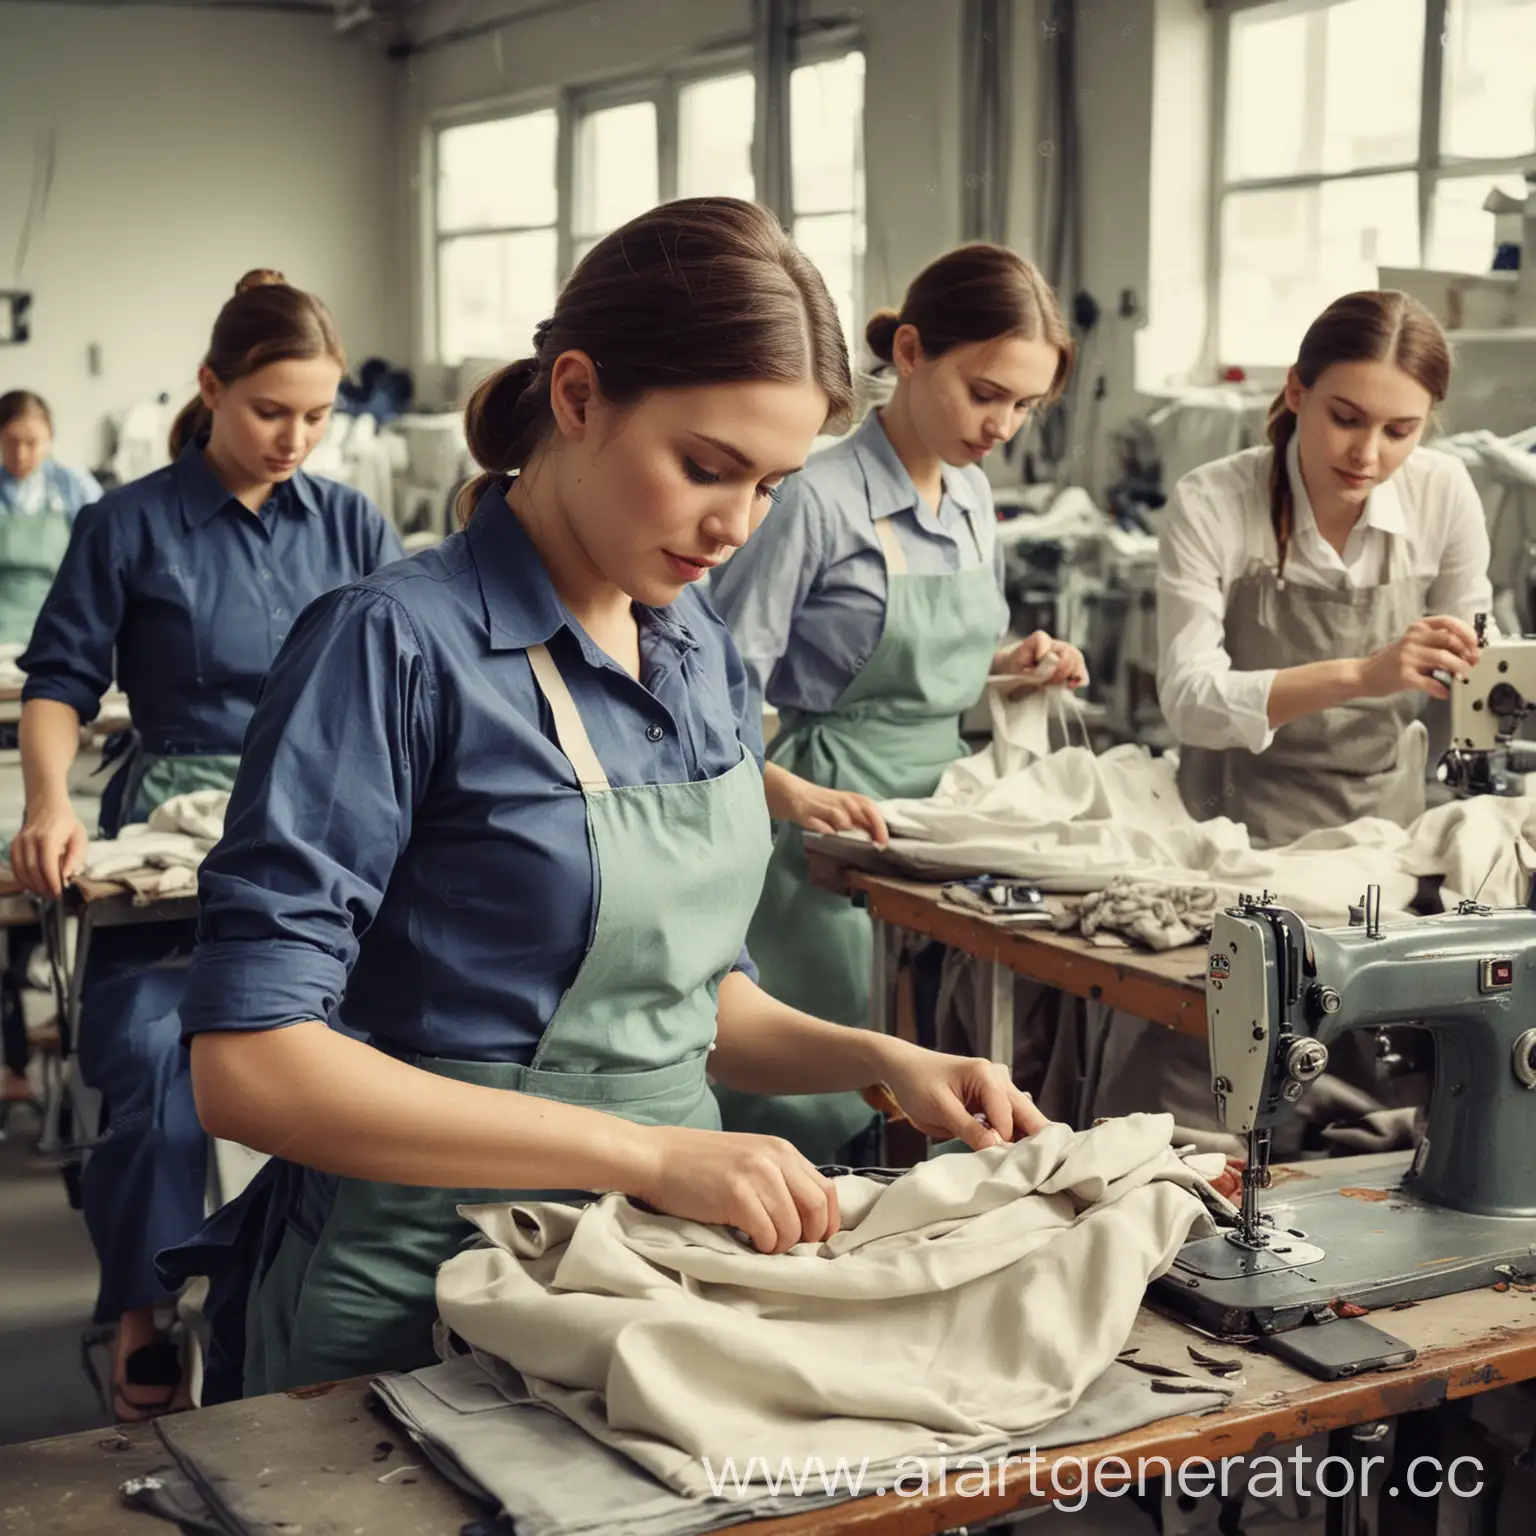 Seamstresses-Working-in-a-Clothing-Factory